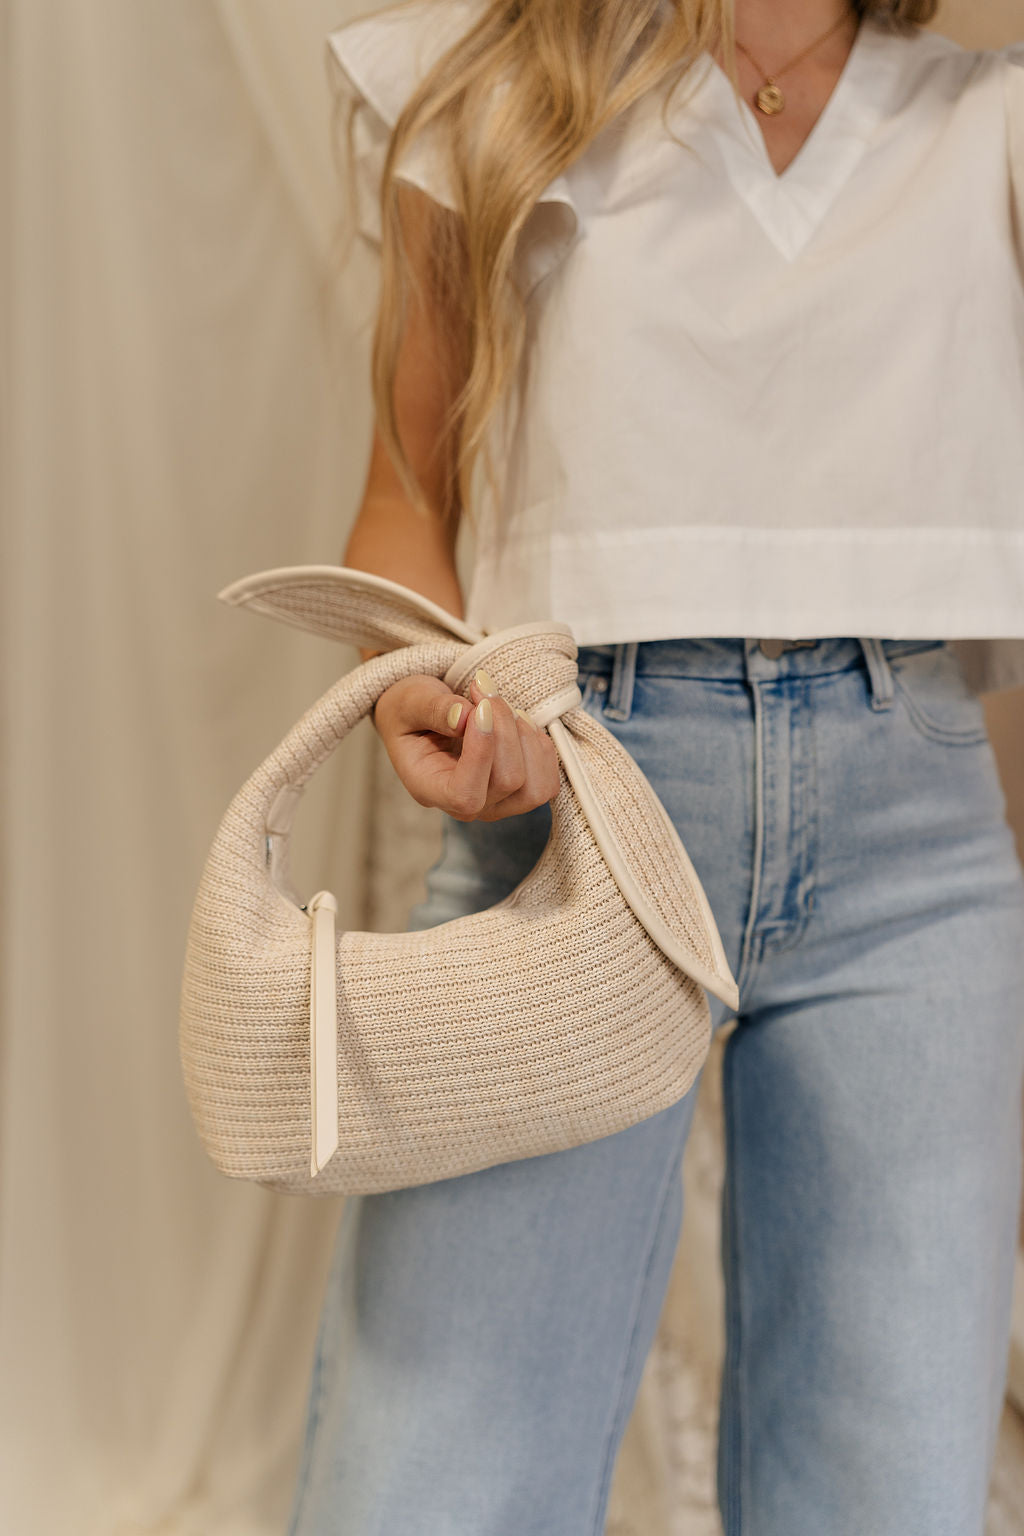 Close front view of model holding the Macy Ivory Knot Handbag. This features a ivory woven fabric with a knot handle. There is a zipper closure along with a pocket on the inside.